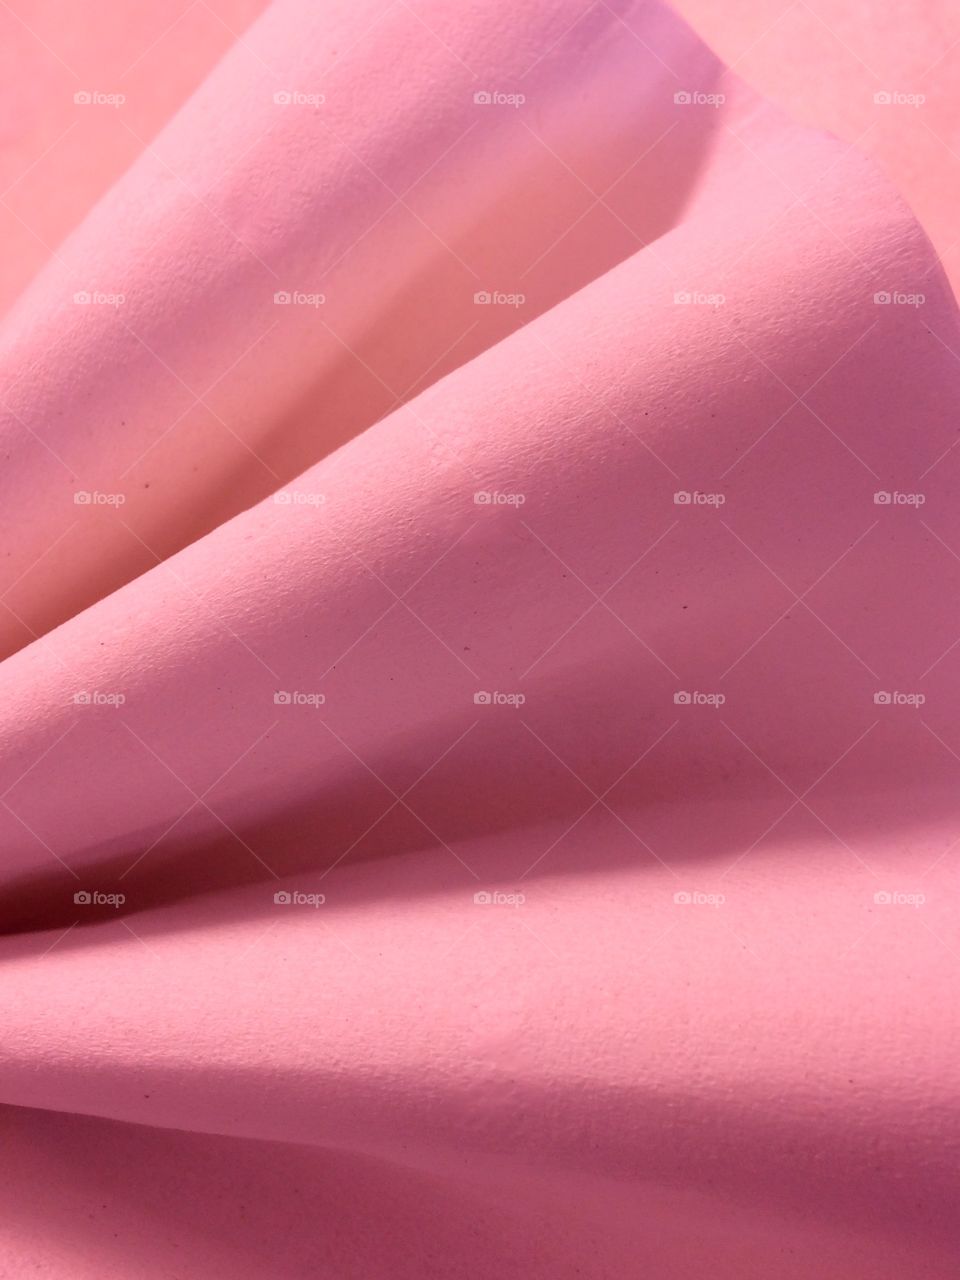 Pink folded paper